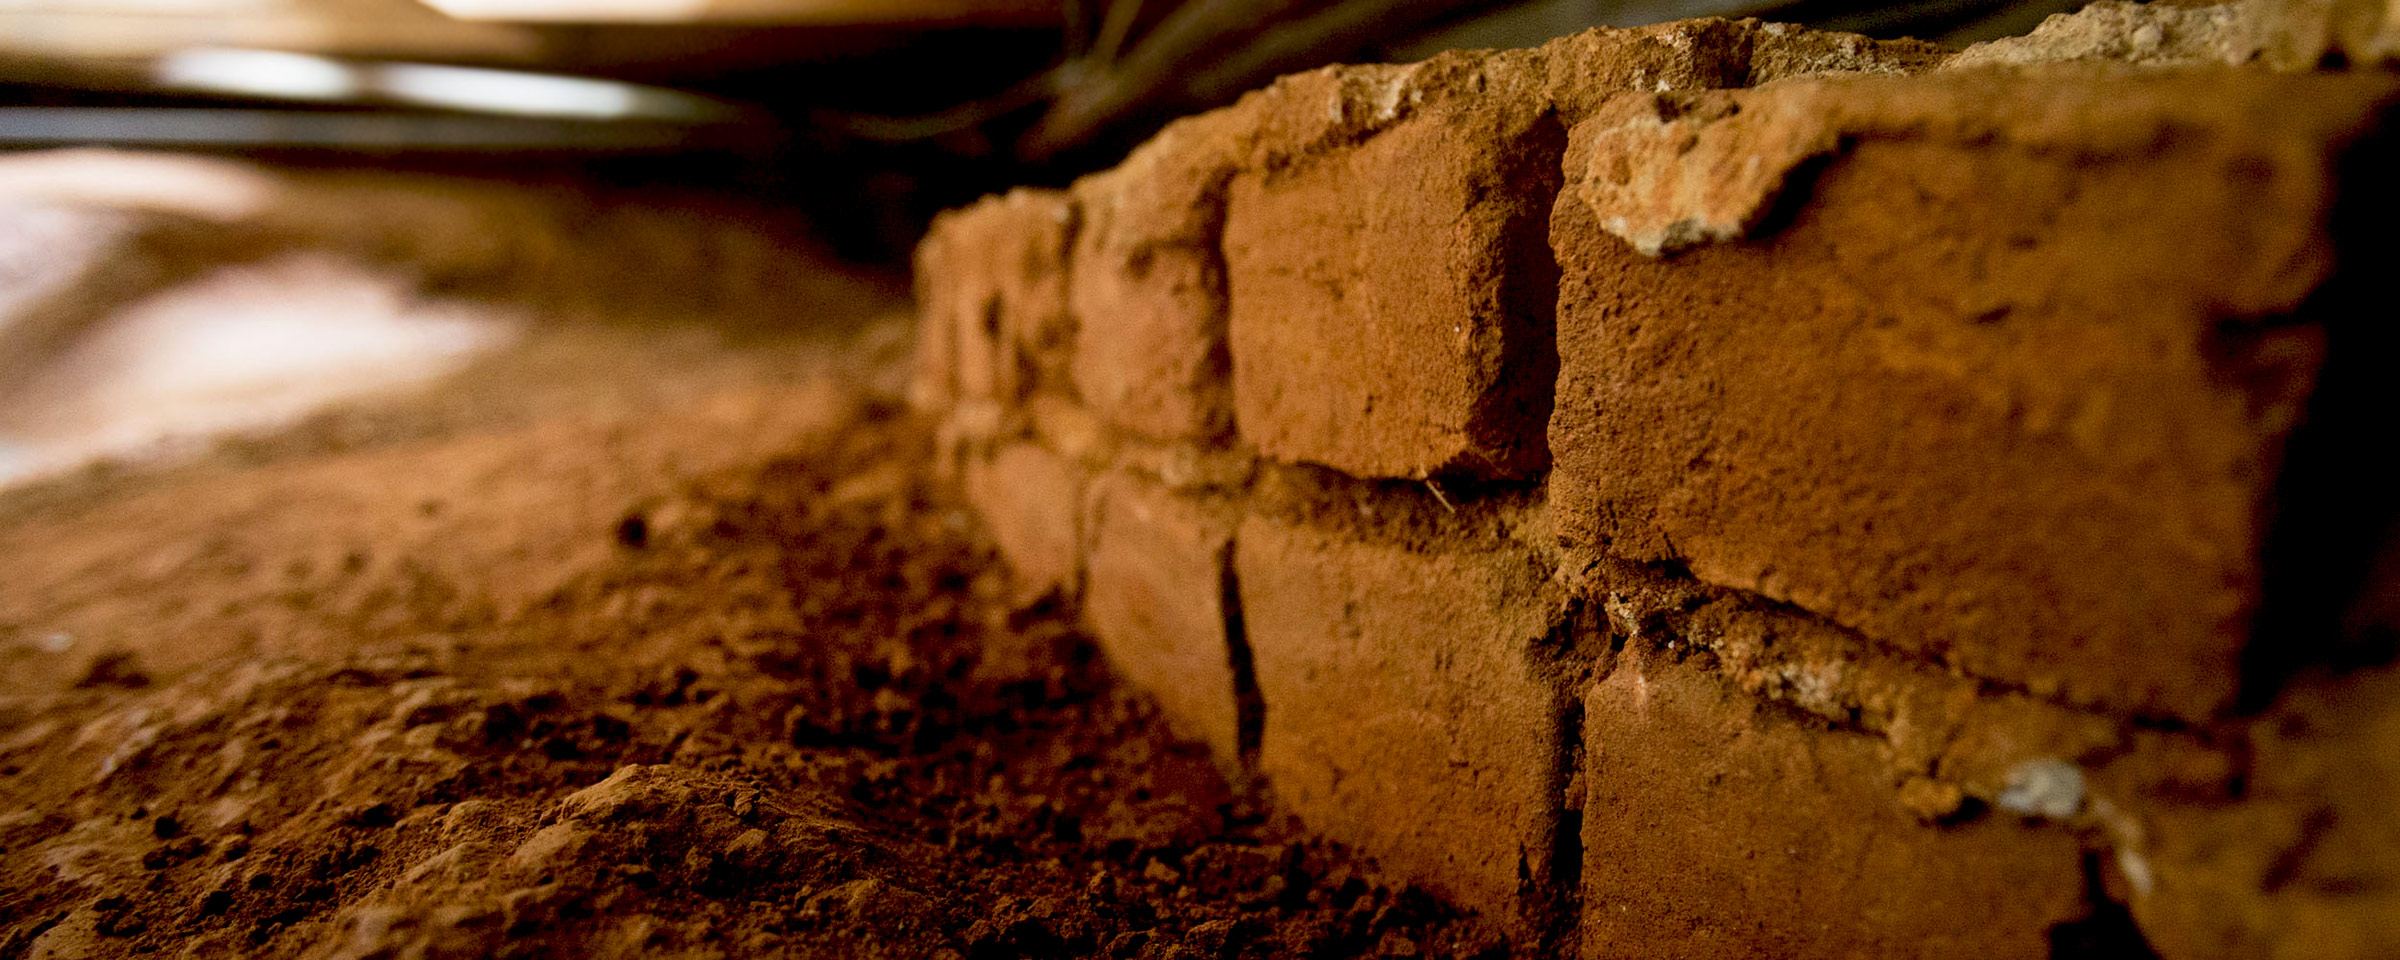 Bricks in dirt from an old structure